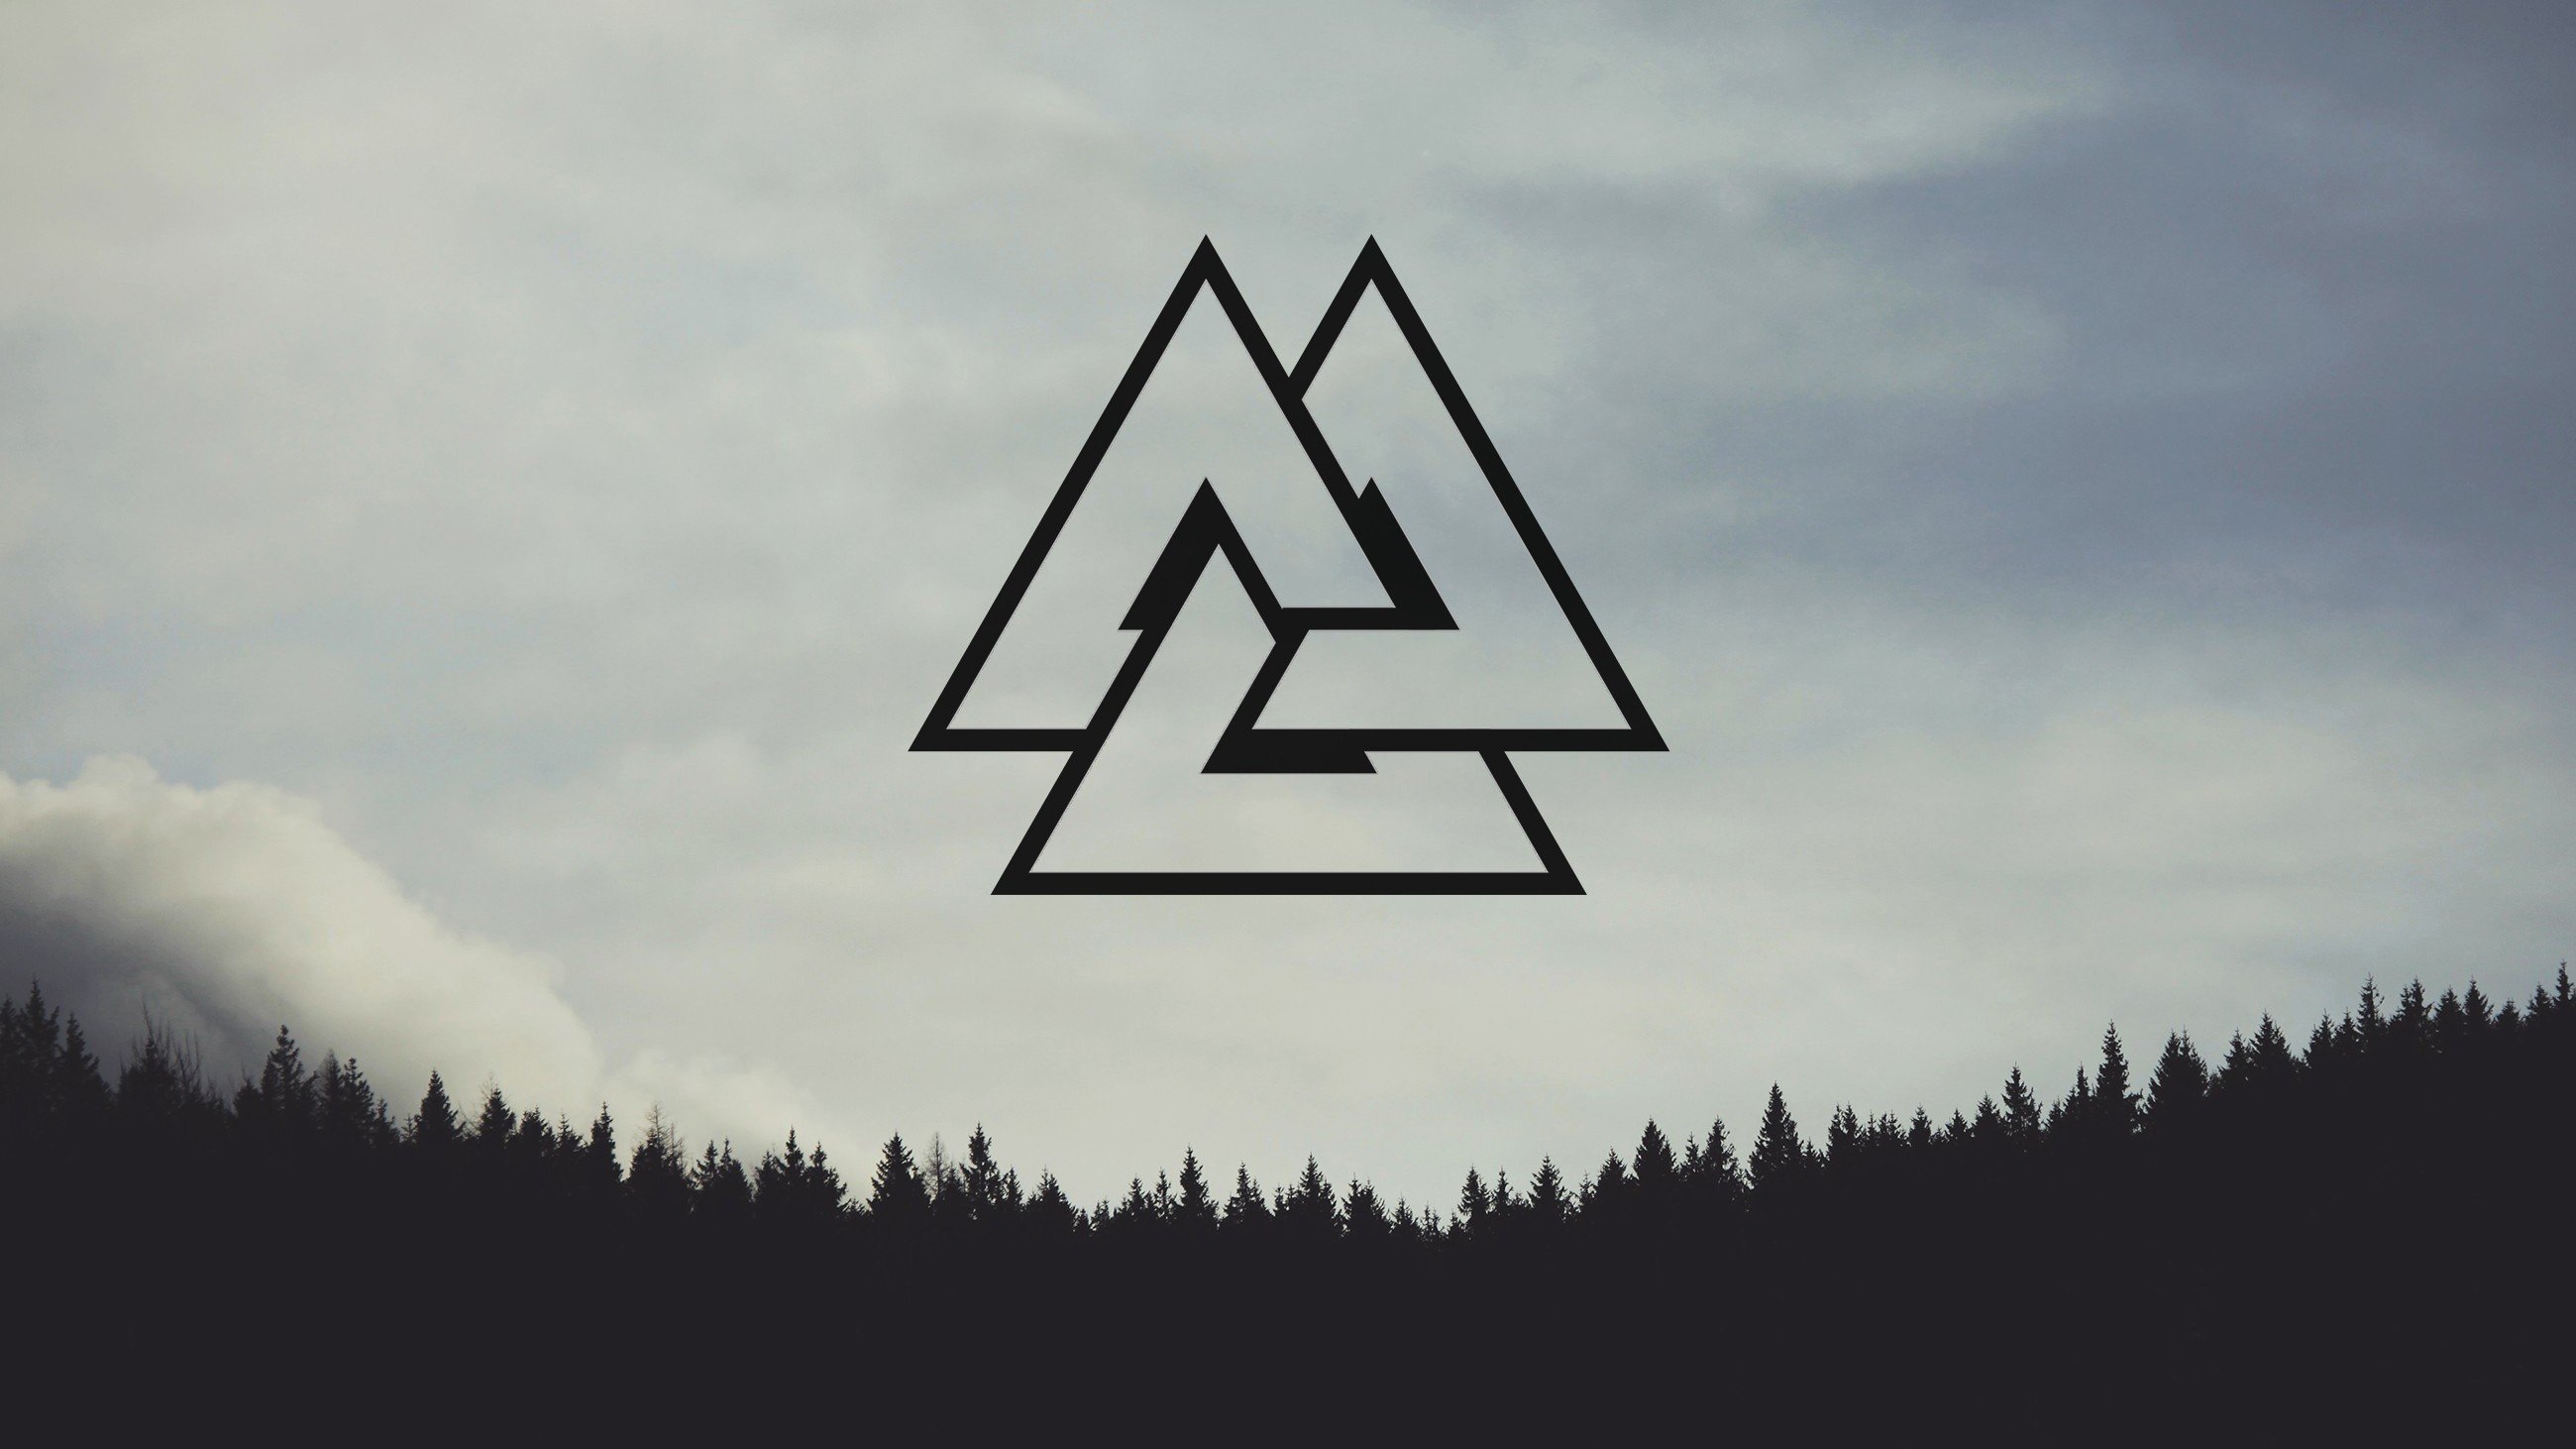 Nordic, Valknut, Nordic landscapes, Forest, Pine trees Wallpaper